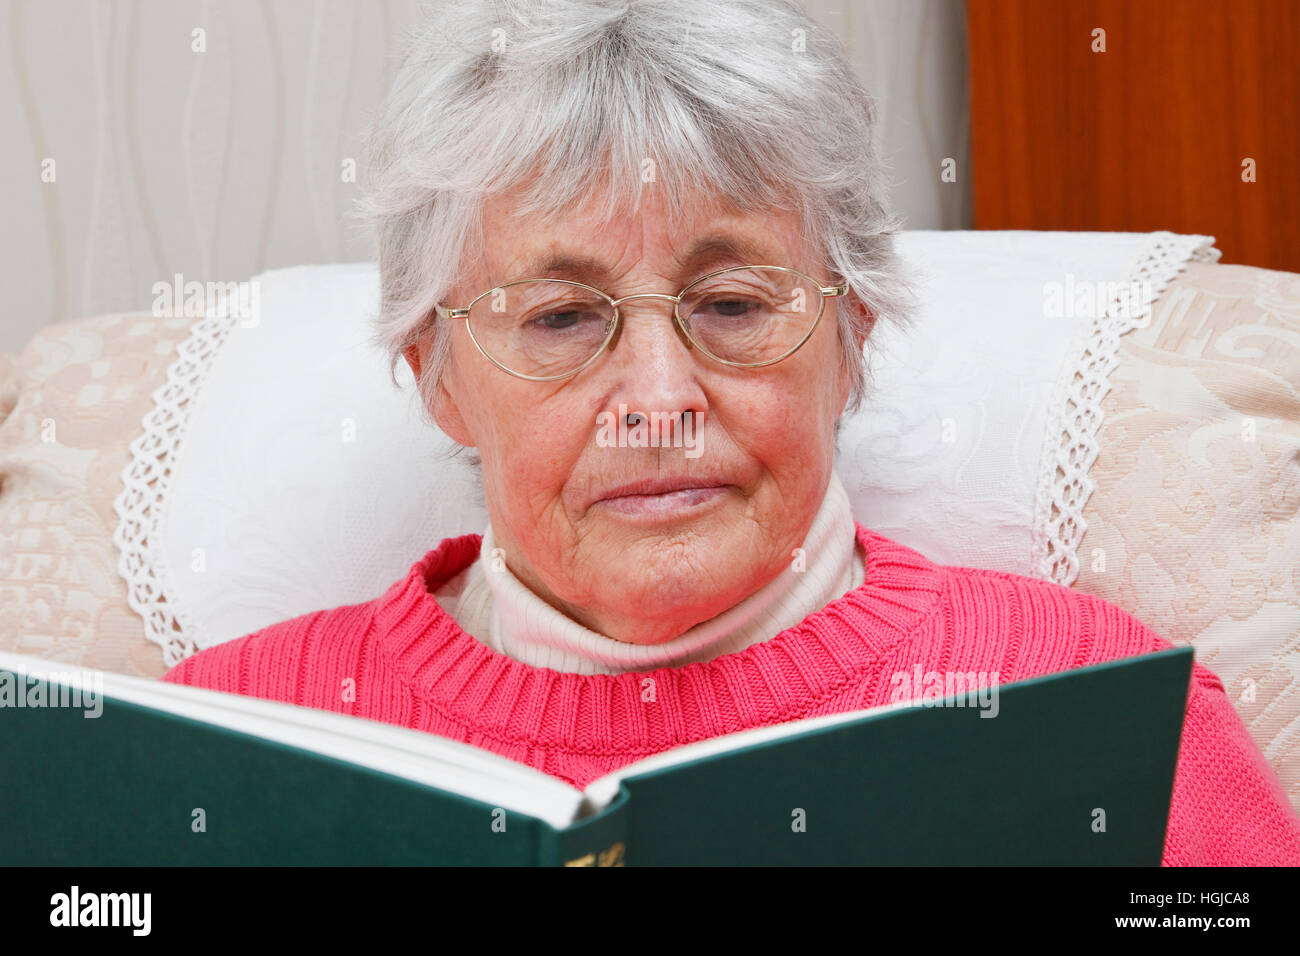 Retired elderly senior woman wearing spectacles sat relaxing in an easy chair and reading a book at home. England, UK, Britain. Stock Photo